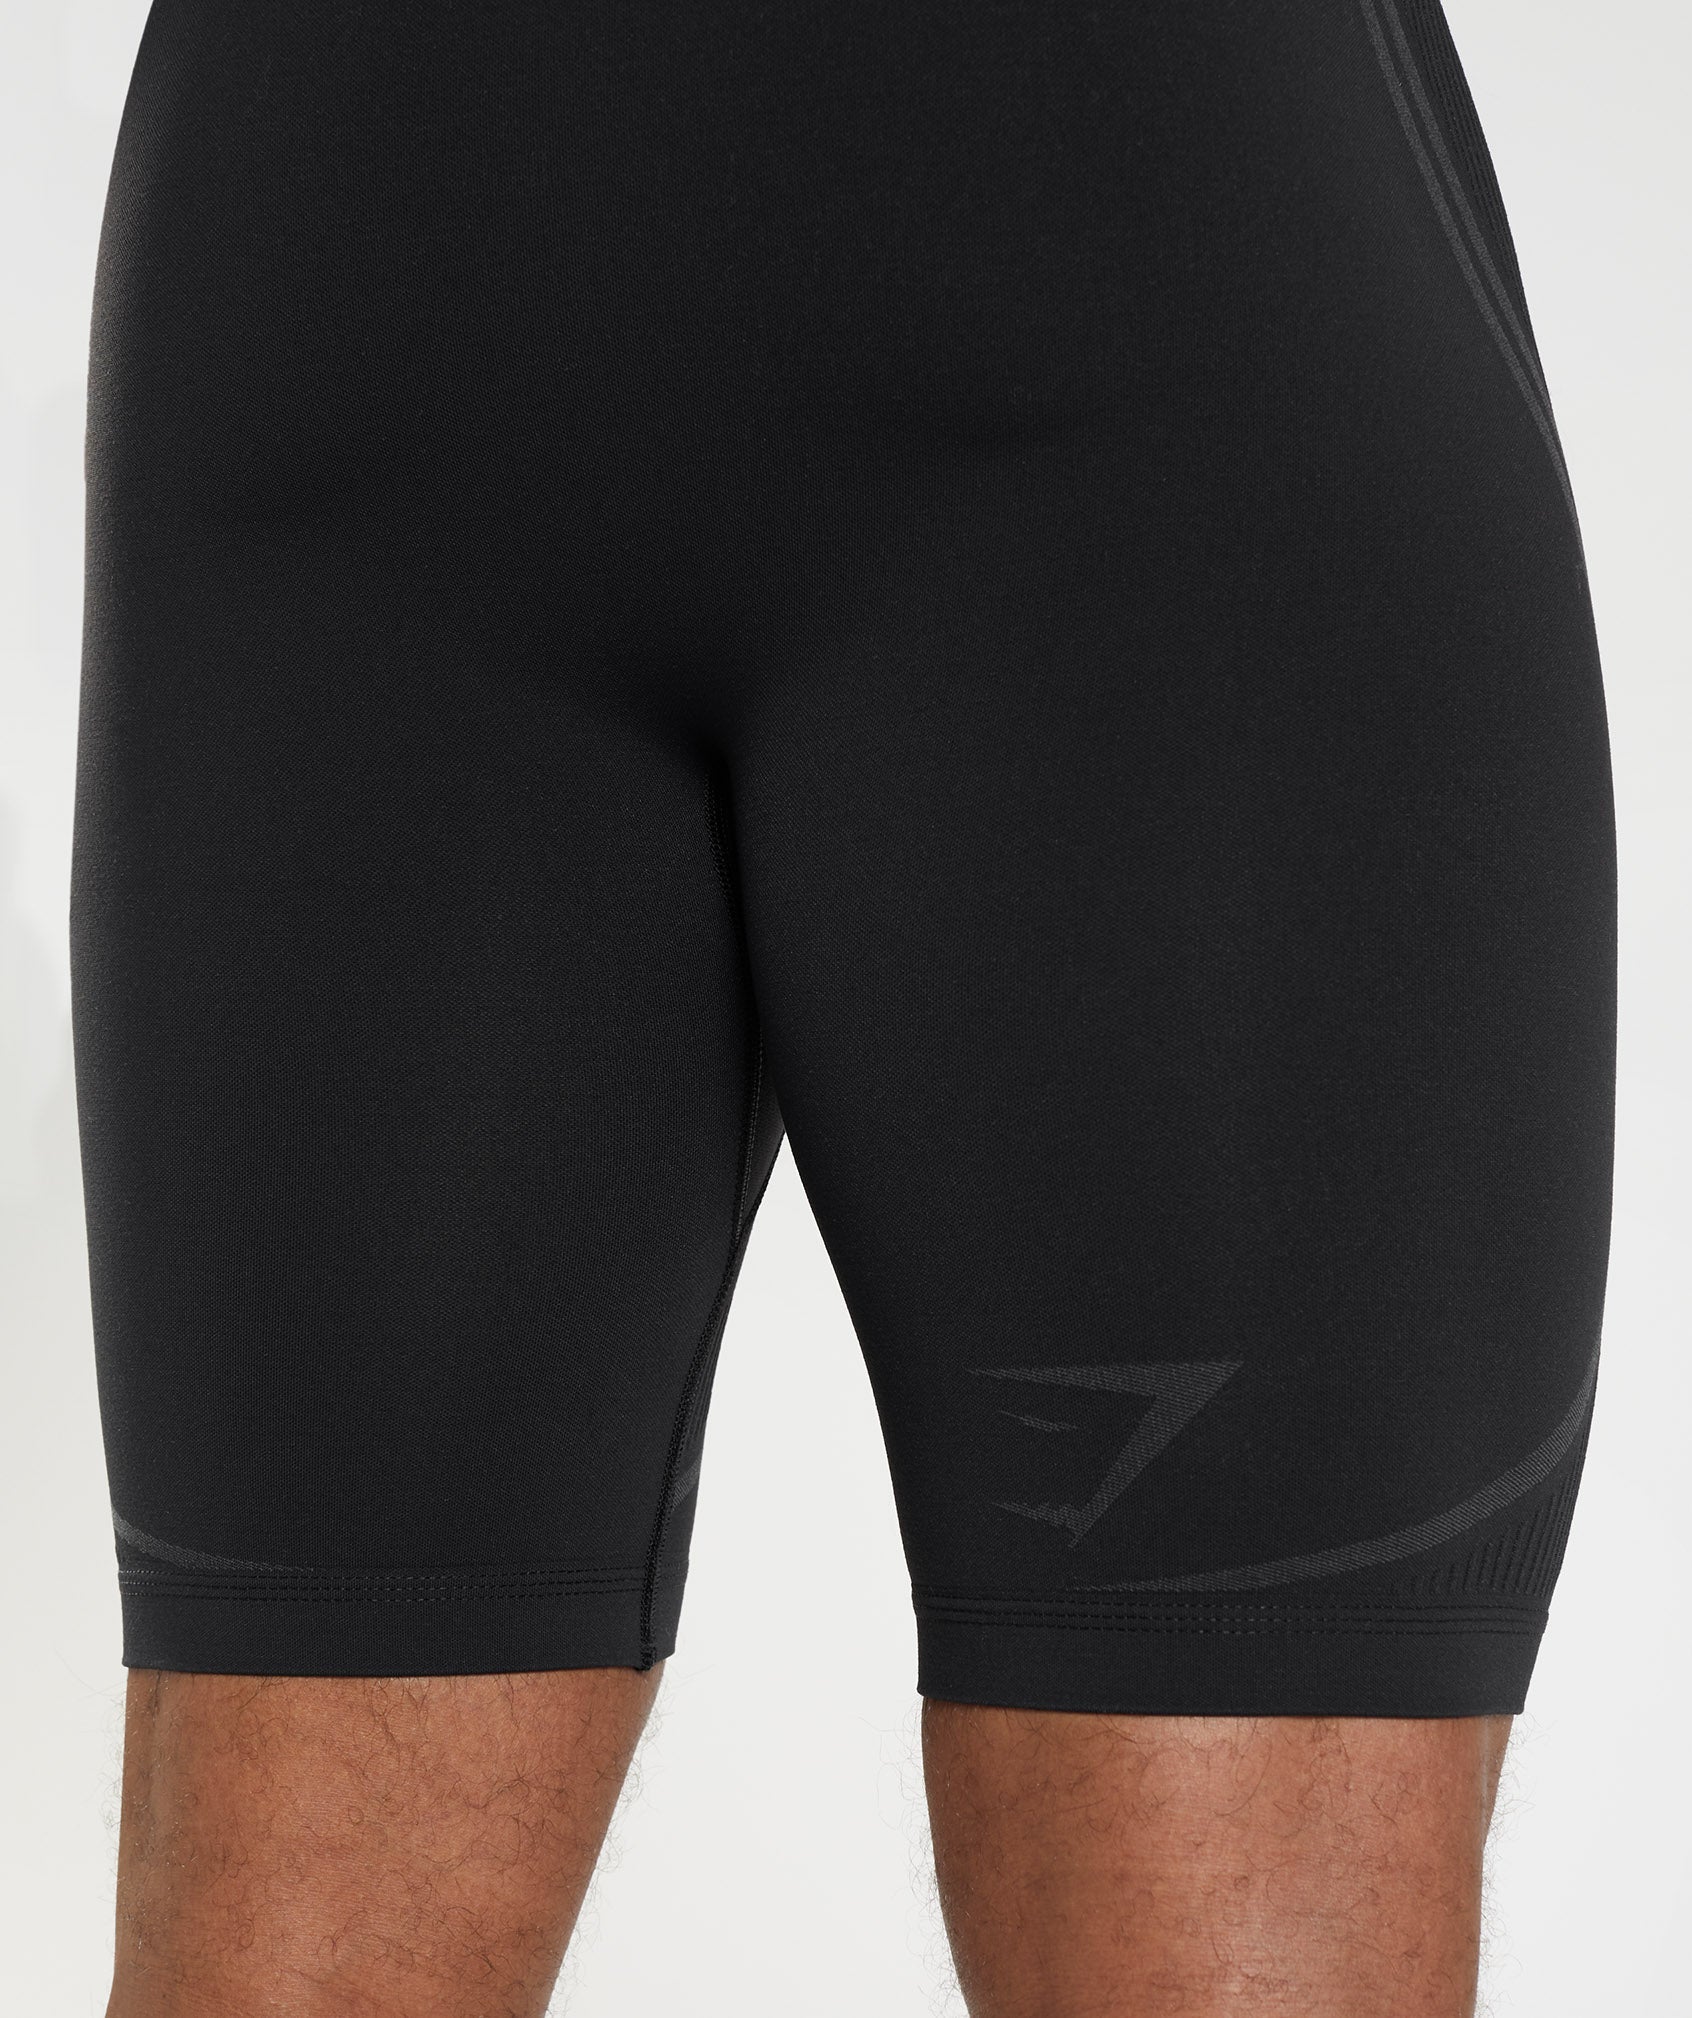 315 Seamless 1/2 Shorts in Black/Charcoal Grey - view 7